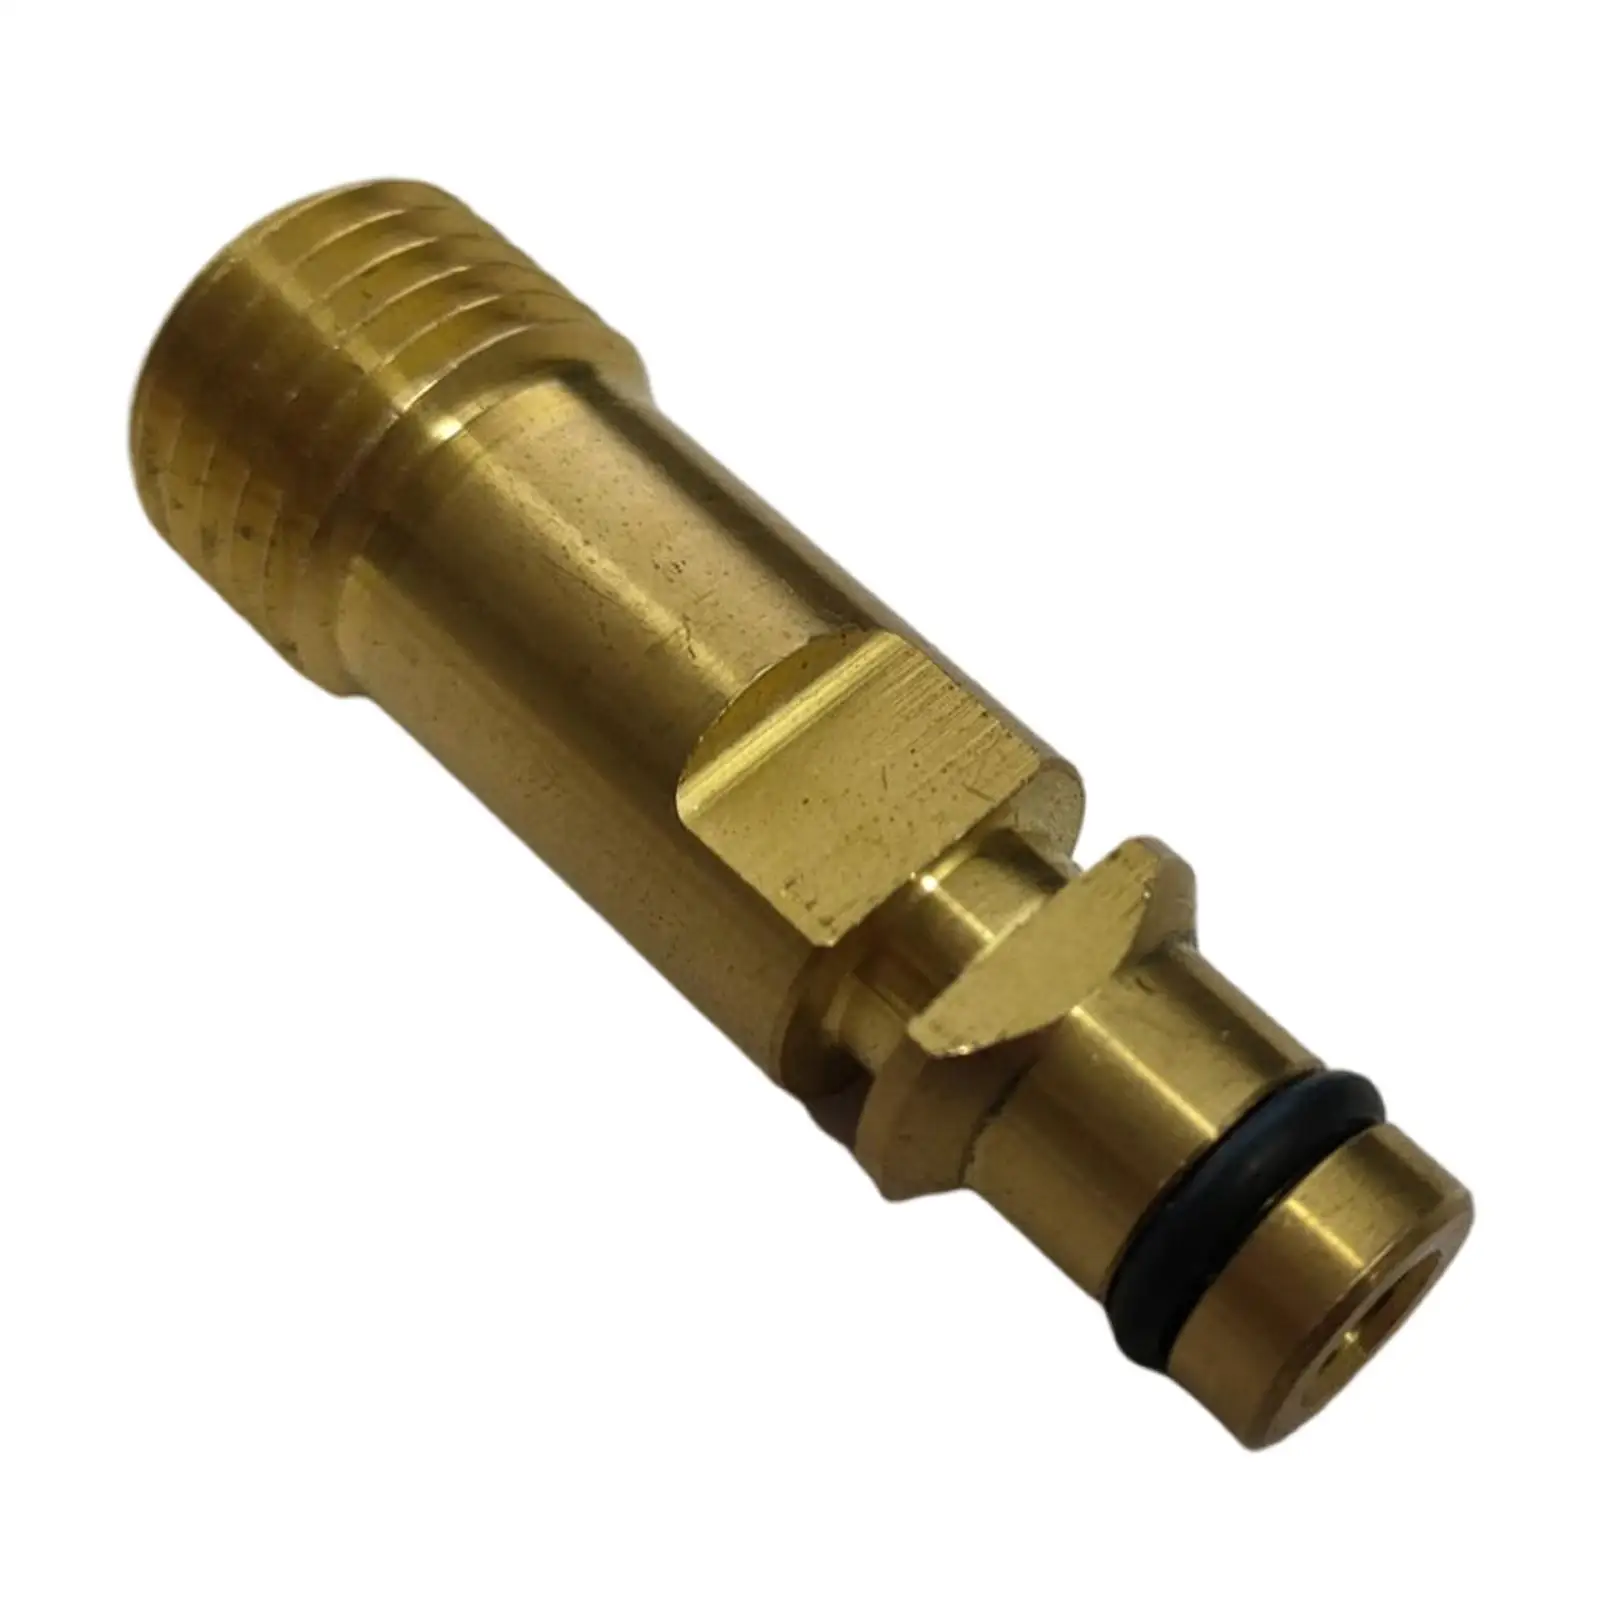 M22*1.5 Pressure Washer Quick Connector Adaptor Washing Machine Tube Joint for K5